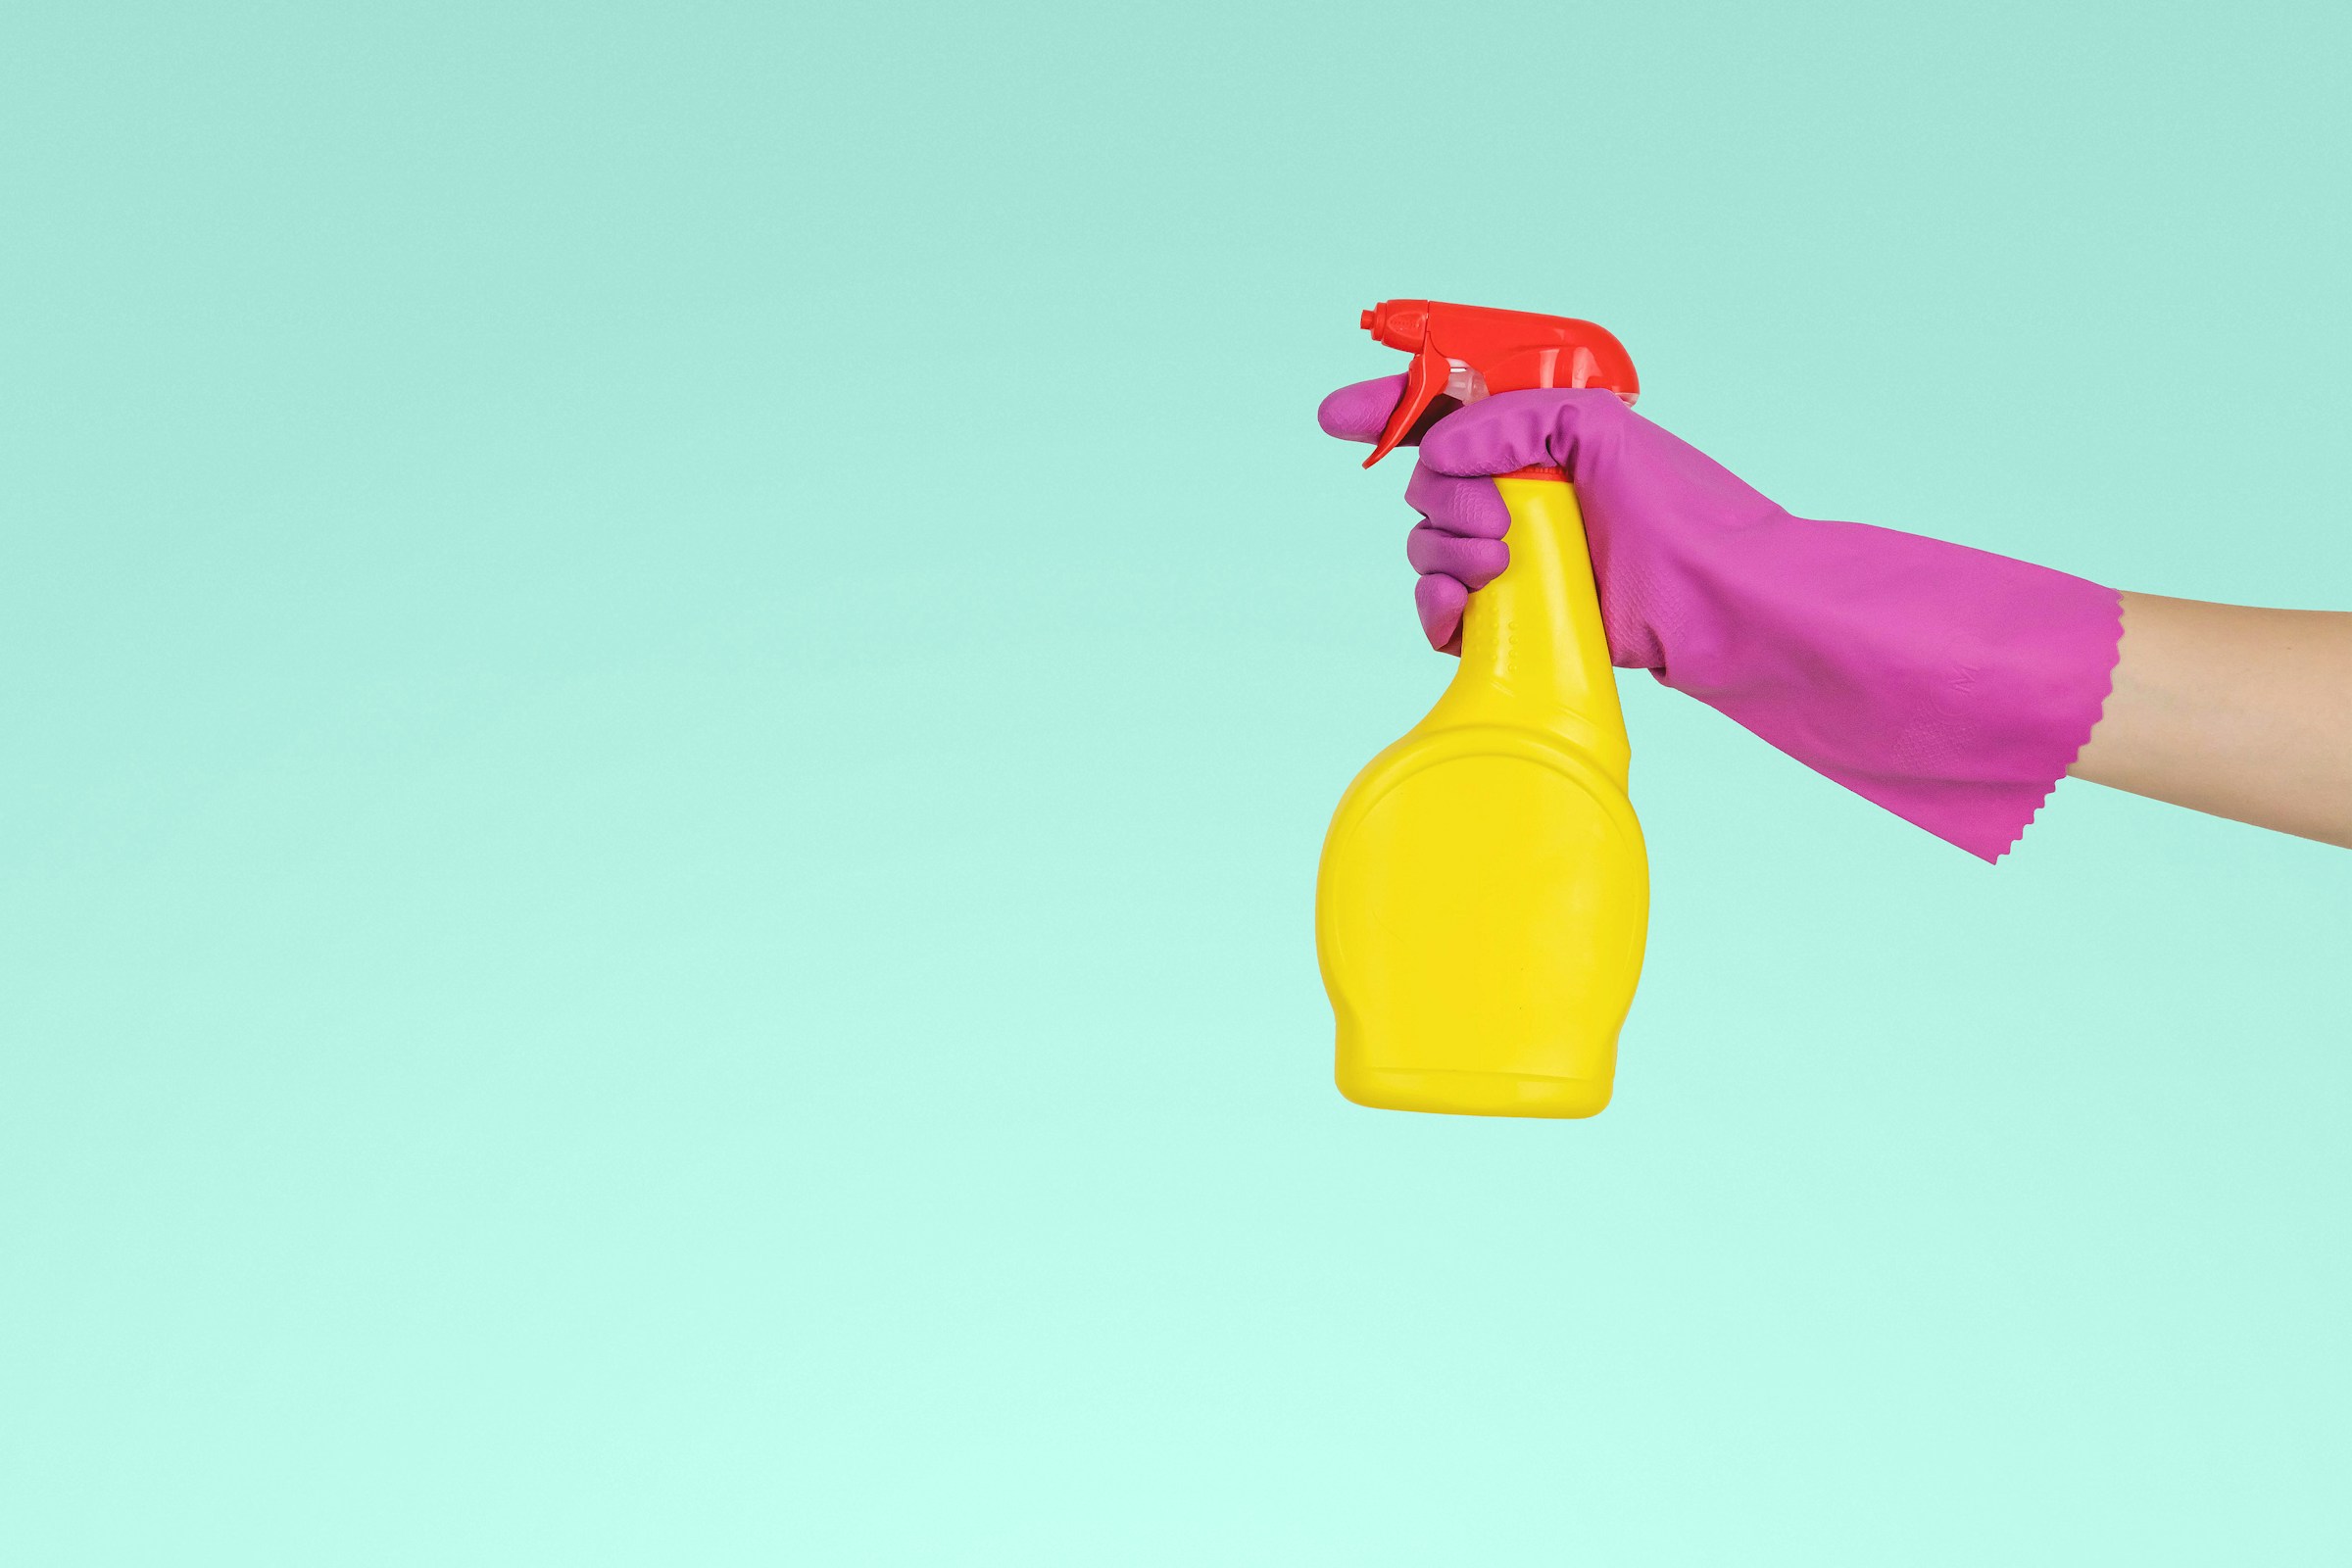 A person holding yellow spray bottle | Source: Unsplash